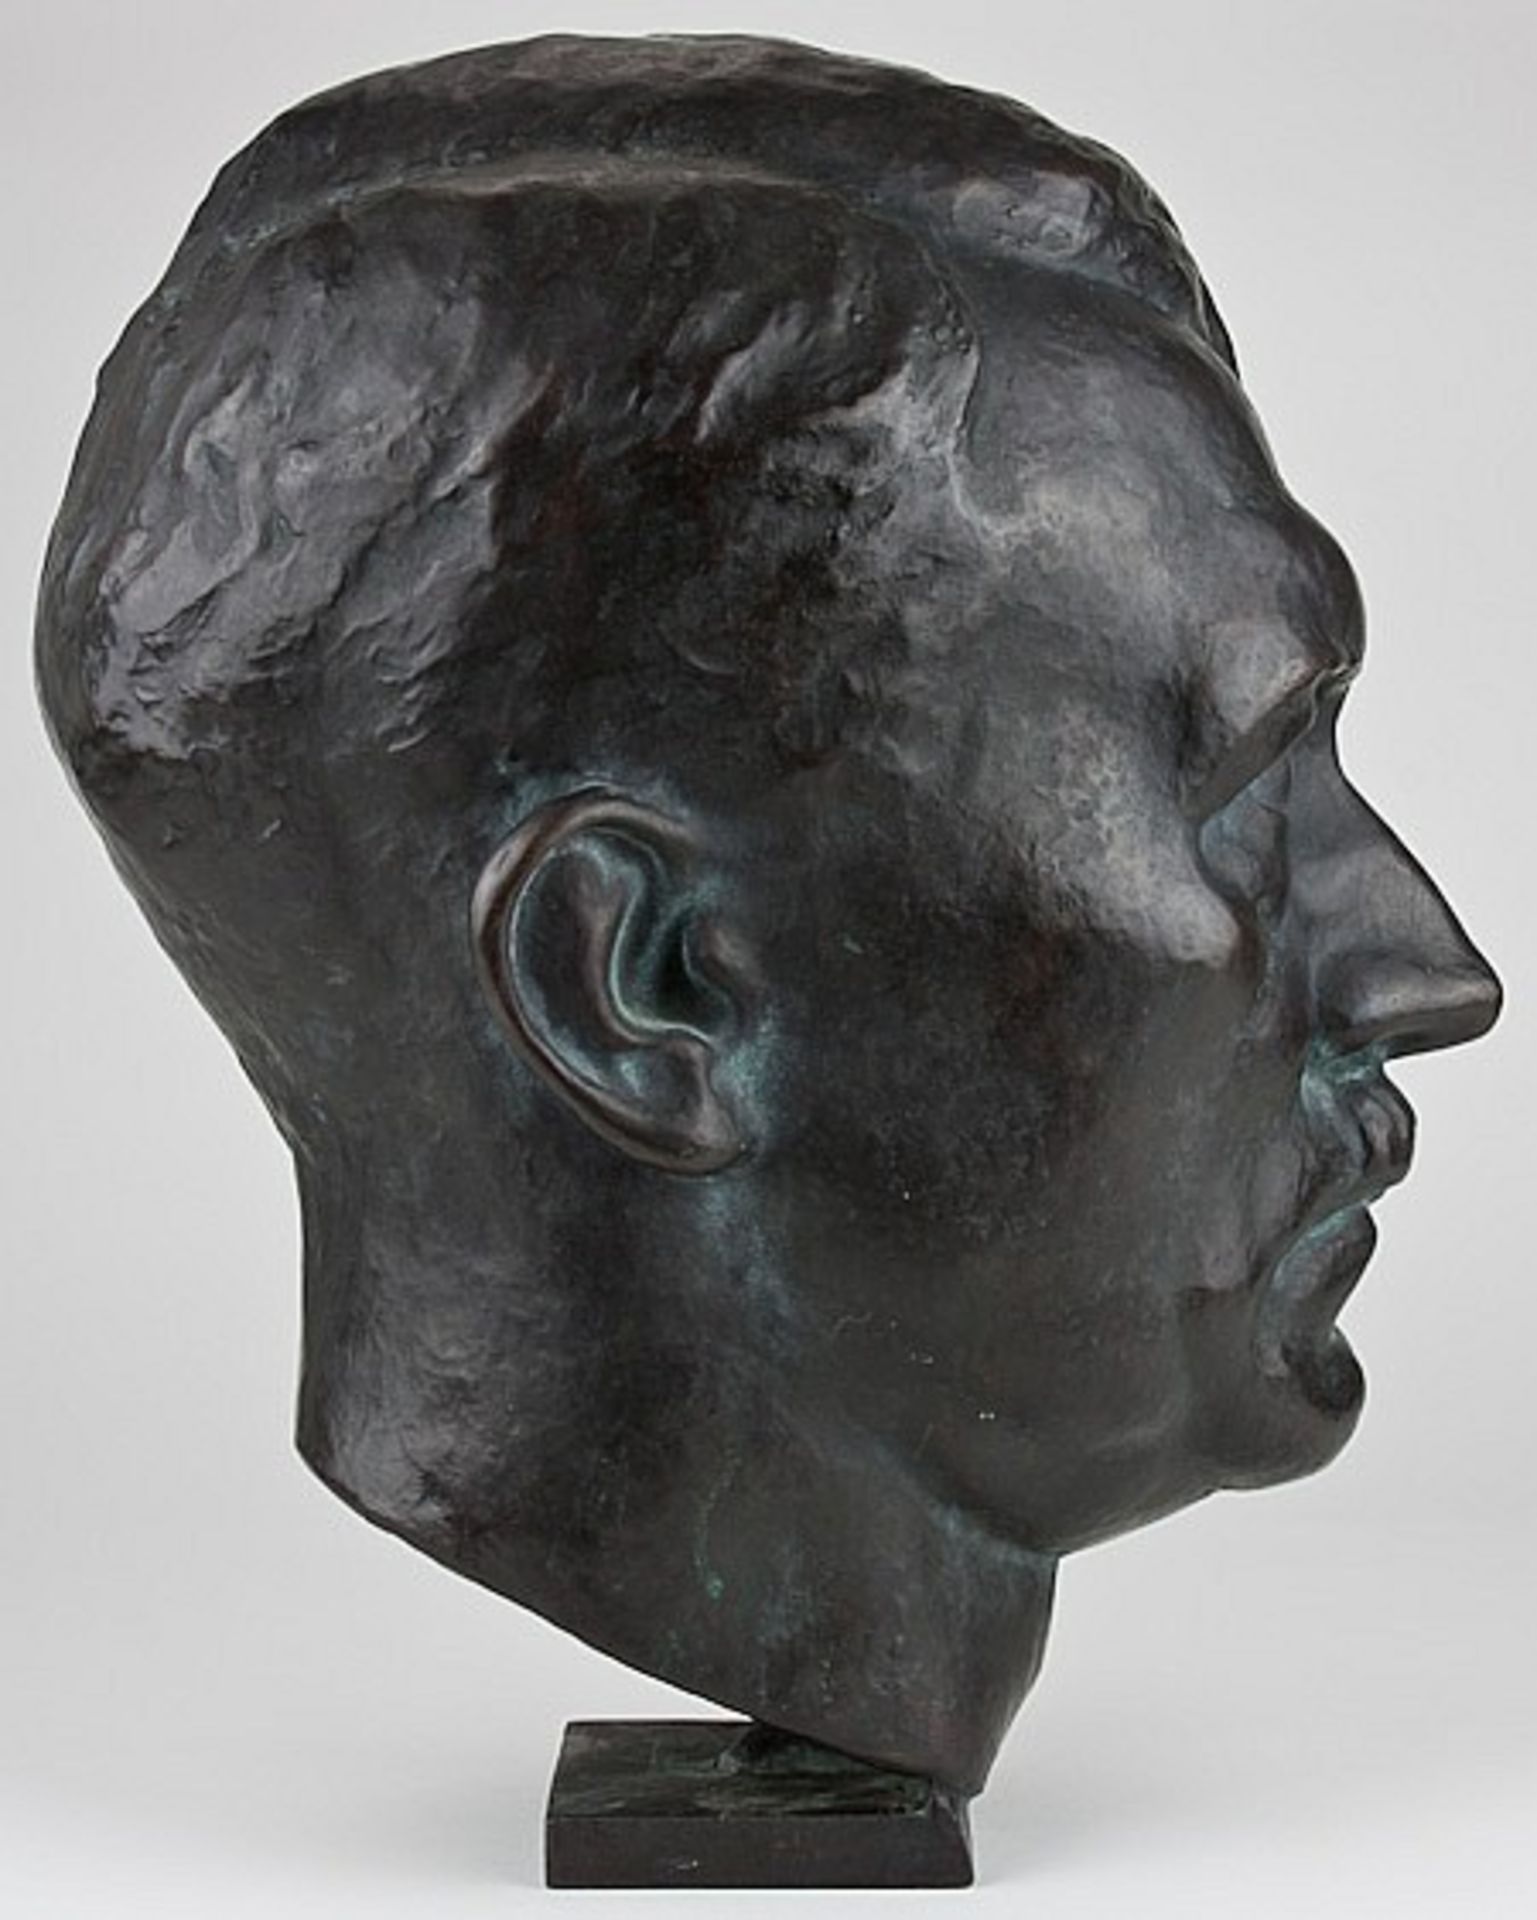 BUST OF ADOLF HITLER OWNED BY JOSEPH GOEBBELS AND PRESENTED TO ONE OF HIS SPIES - Image 4 of 16